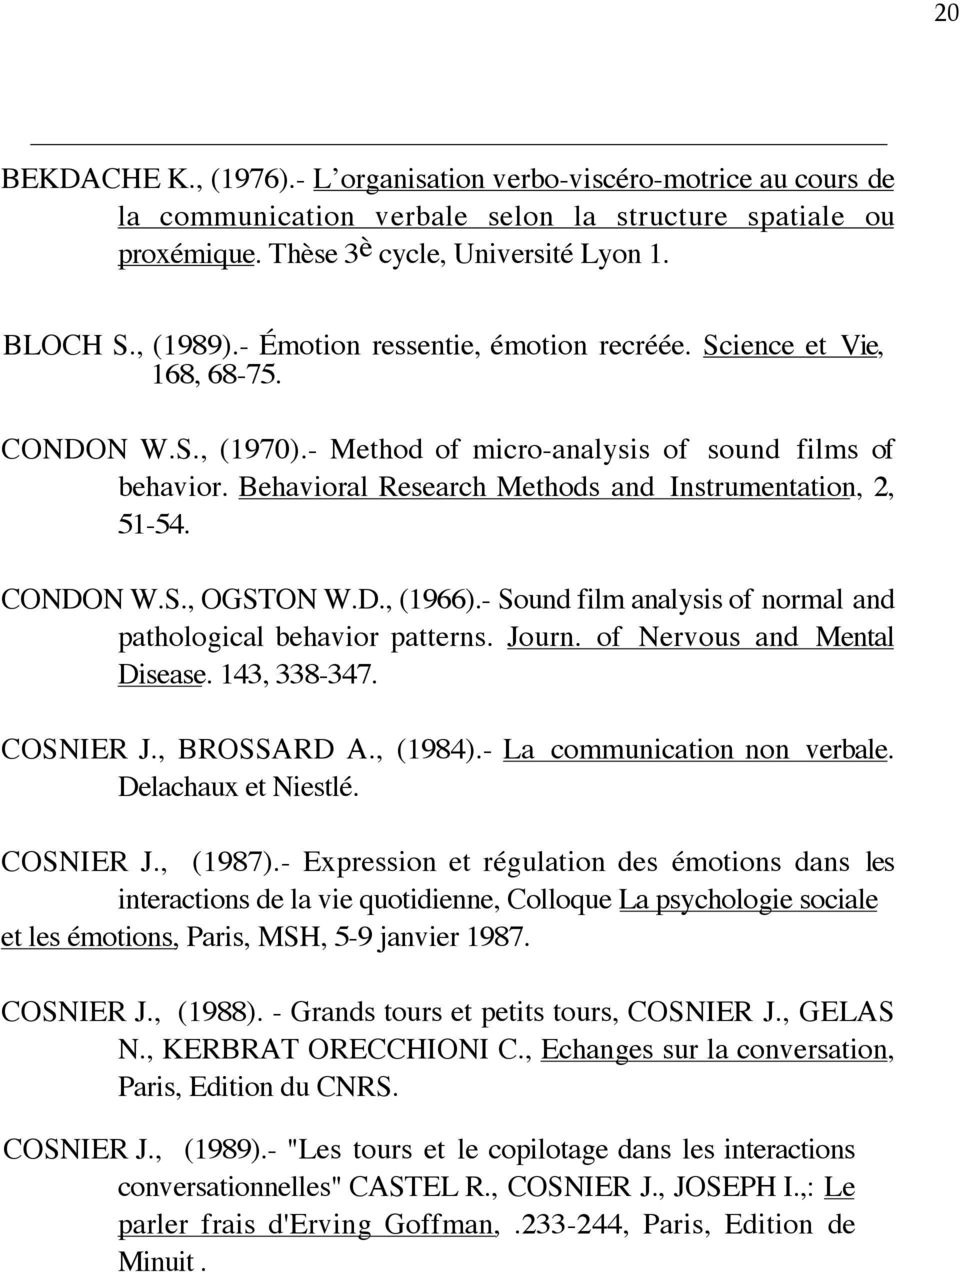 CONDON W.S., OGSTON W.D., (1966).- Sound film analysis of normal and pathological behavior patterns. Journ. of Nervous and Mental Disease. 143, 338-347. COSNIER J., BROSSARD A., (1984).